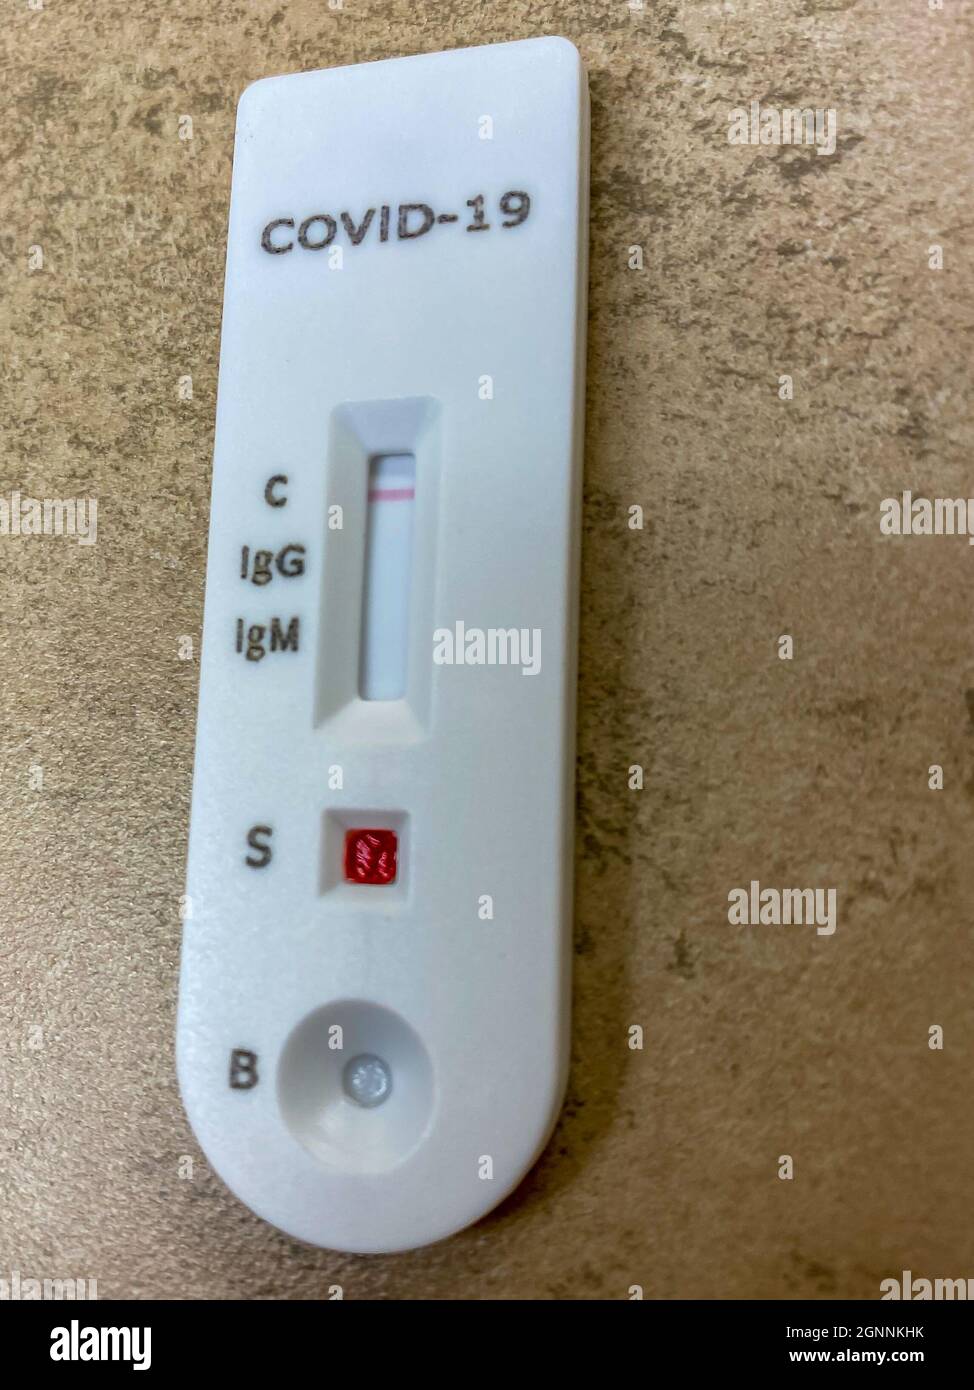 A COVID-19 antibody test showing negative results for antibodies for both previous infection and the vaccine. Stock Photo